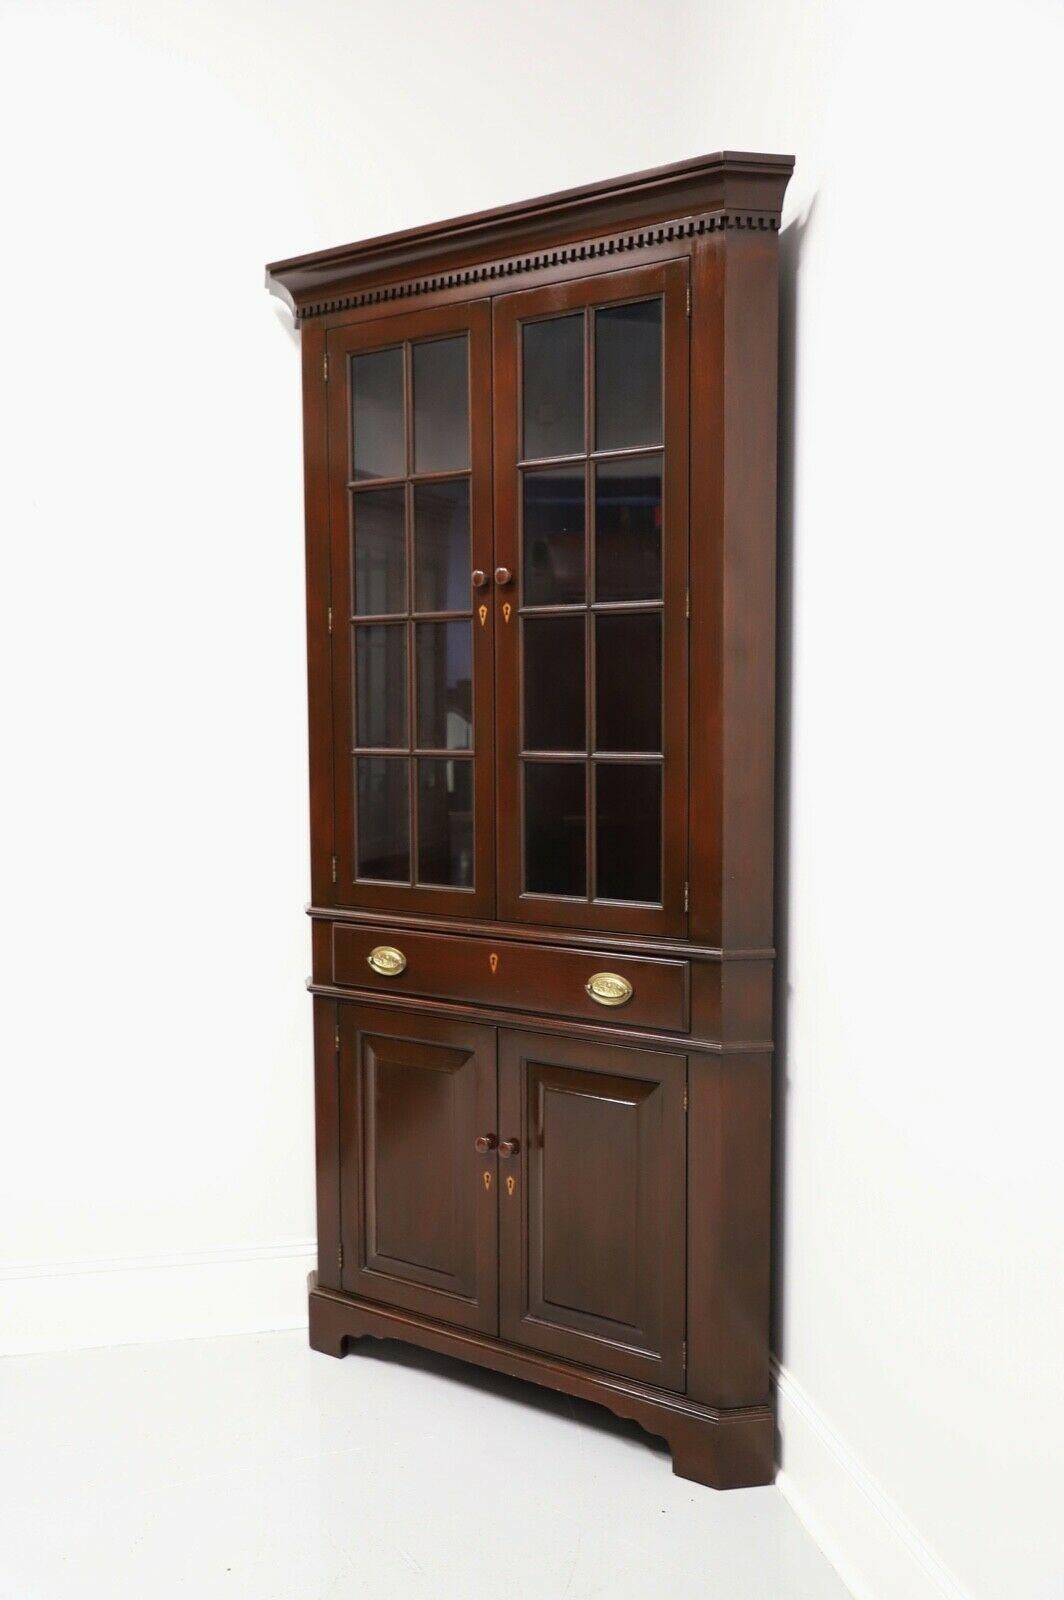 An extra tall Chippendale style corner cabinet by Benbow's of Greensboro, North Carolina, USA. Solid mahogany with wood knobs to doors, brass drawer & hinge hardware, crown & dentil molding and bracket feet. Upper cabinet features three fixed plate